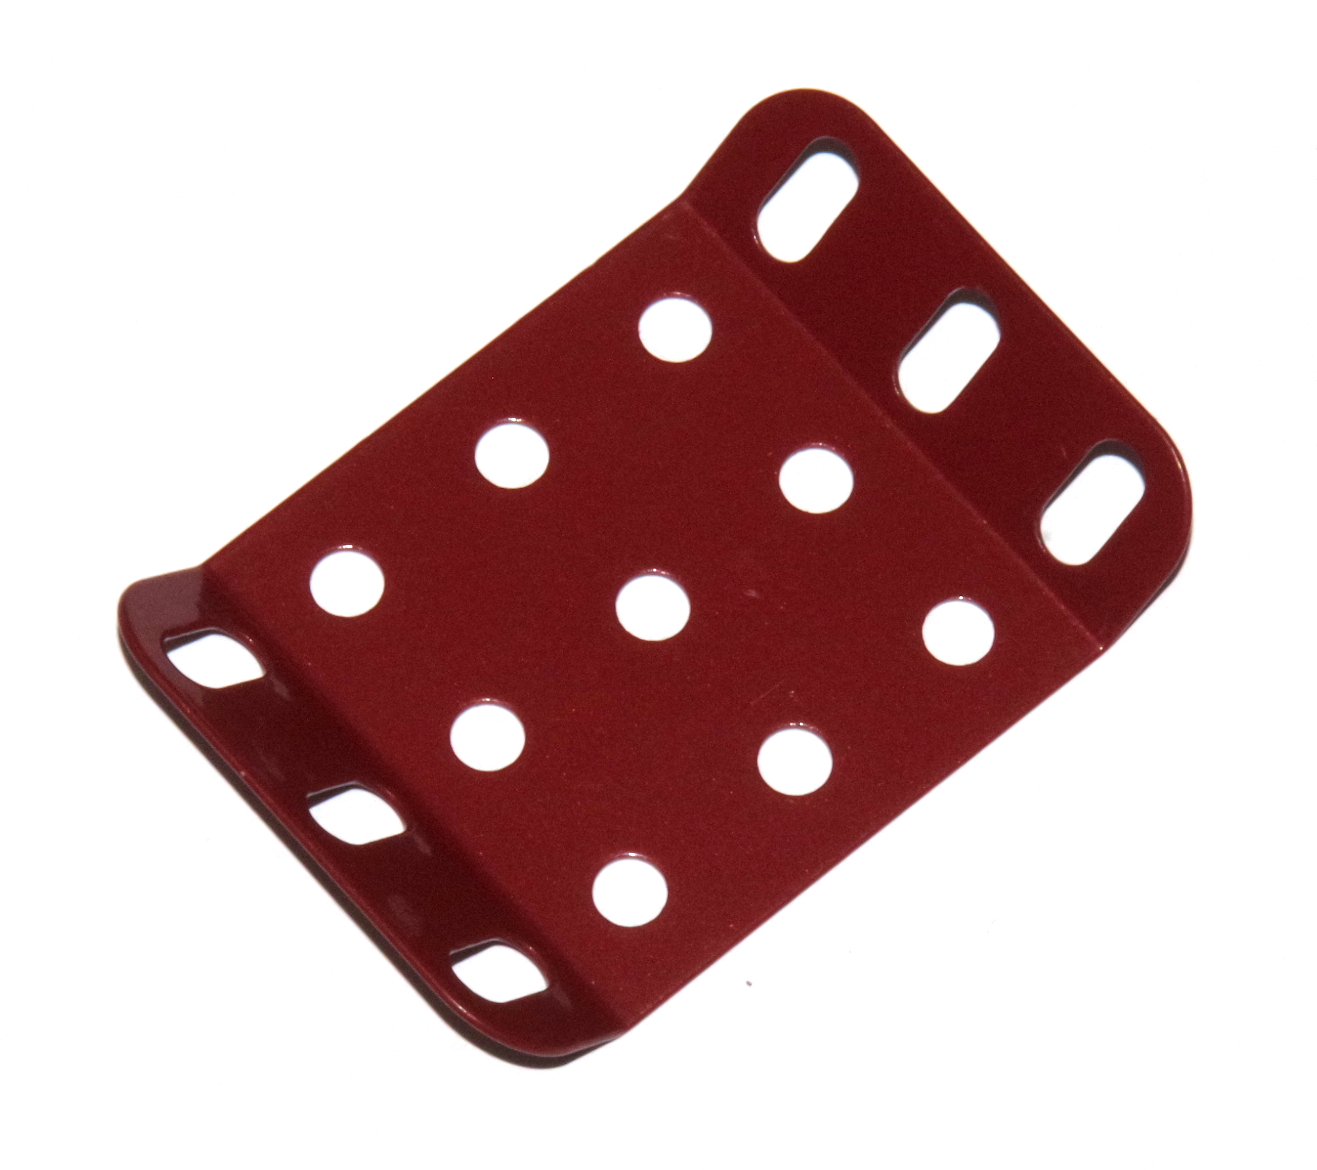 51h Double Obtuse Flanged Plate 5x3 Dark Red Original